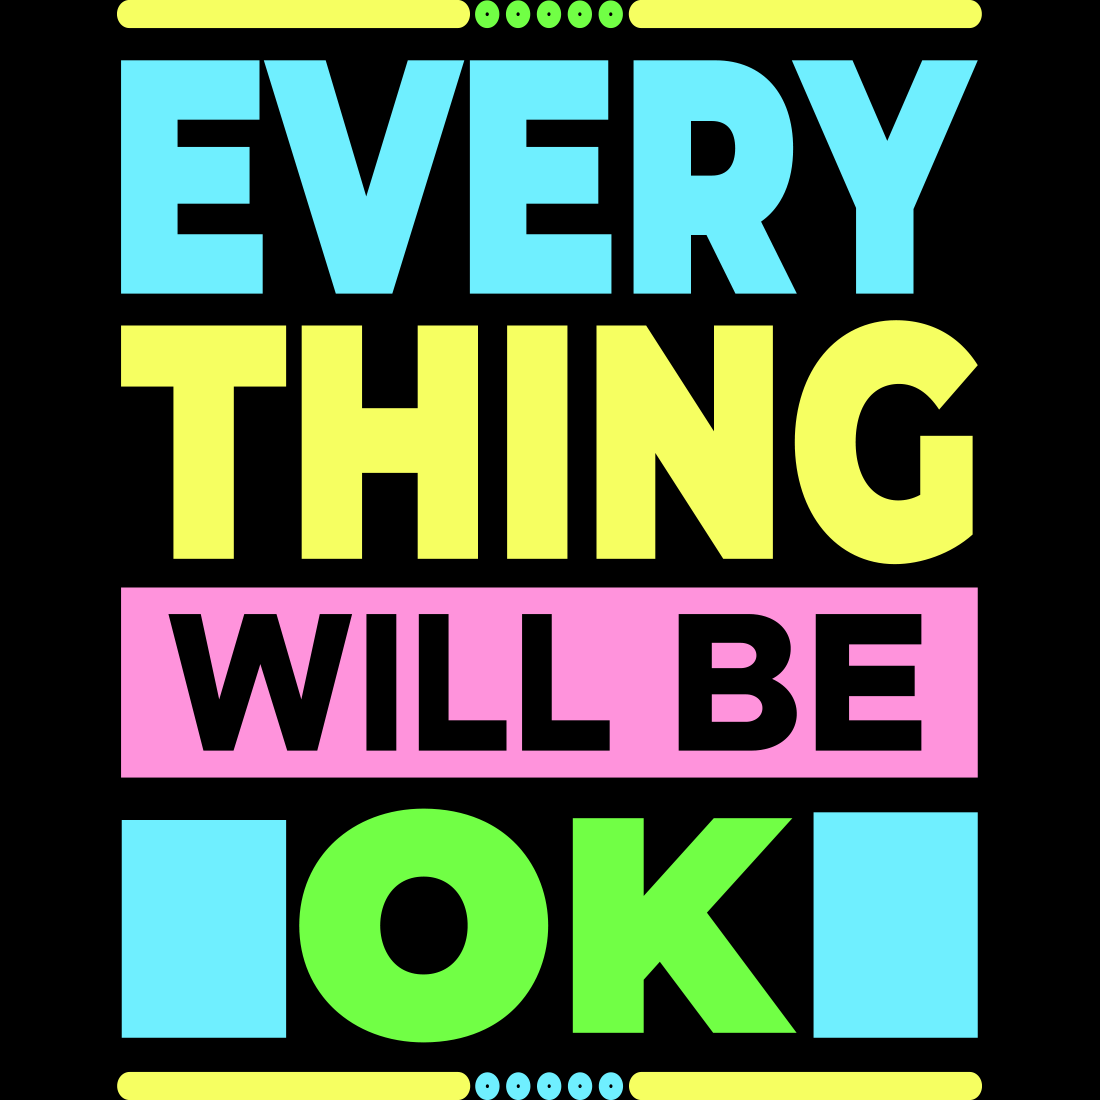 Everything Will Be Ok Typography T-Shirt Design cover image.